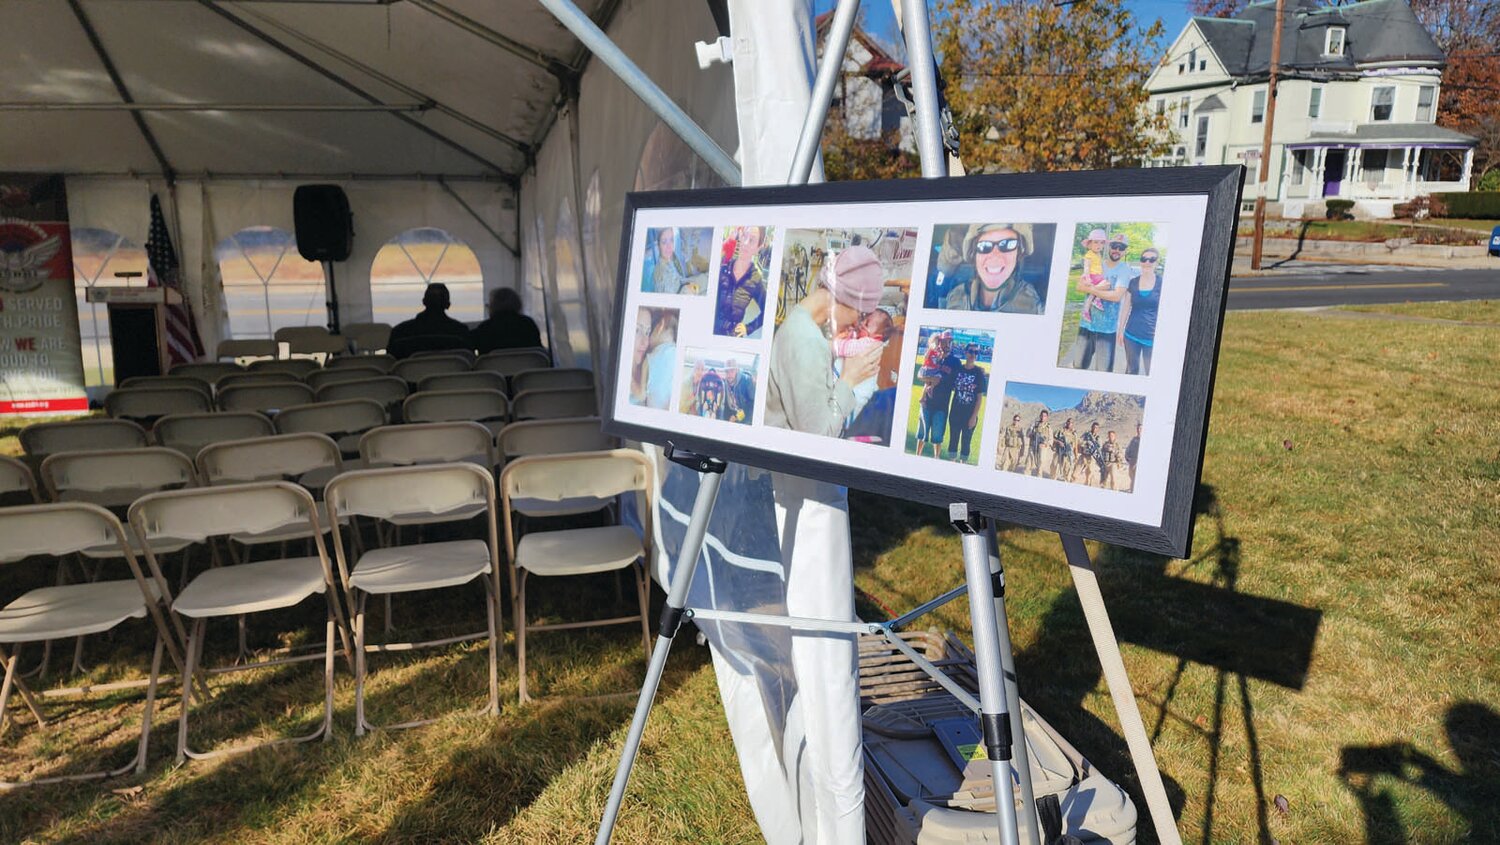 LOST TOO SOON: Attendees were welcomed with a collage of photos of Andrea T. Ryder. Ryder died in 2020 at the age of 34 from service-connected cancer.